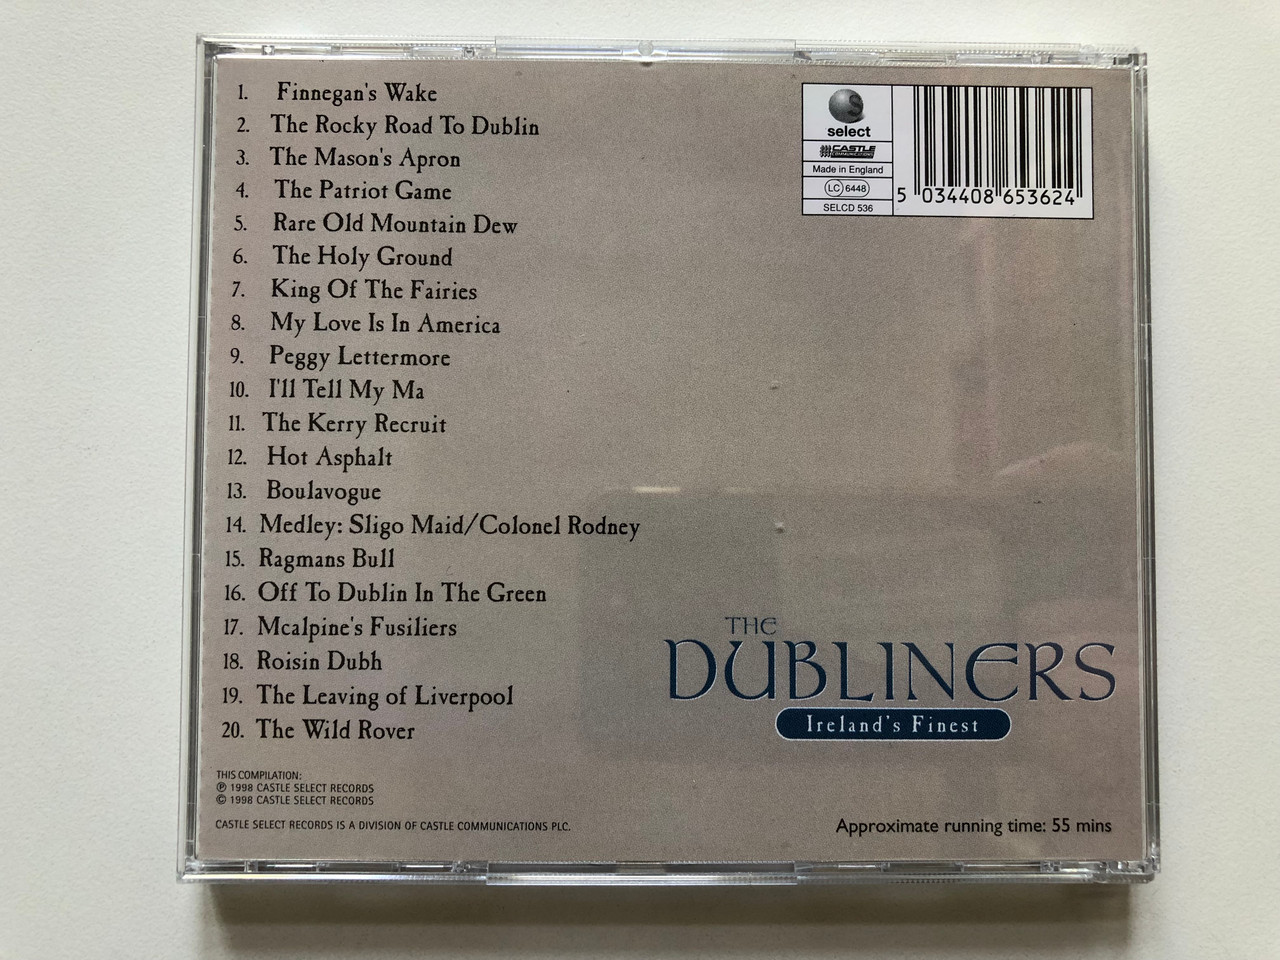 https://cdn10.bigcommerce.com/s-62bdpkt7pb/products/0/images/313298/The_Dubliners_Irelands_Finest_Castle_Select_Audio_CD_1998_SELCD_536_2__71357.1700664946.1280.1280.JPG?c=2